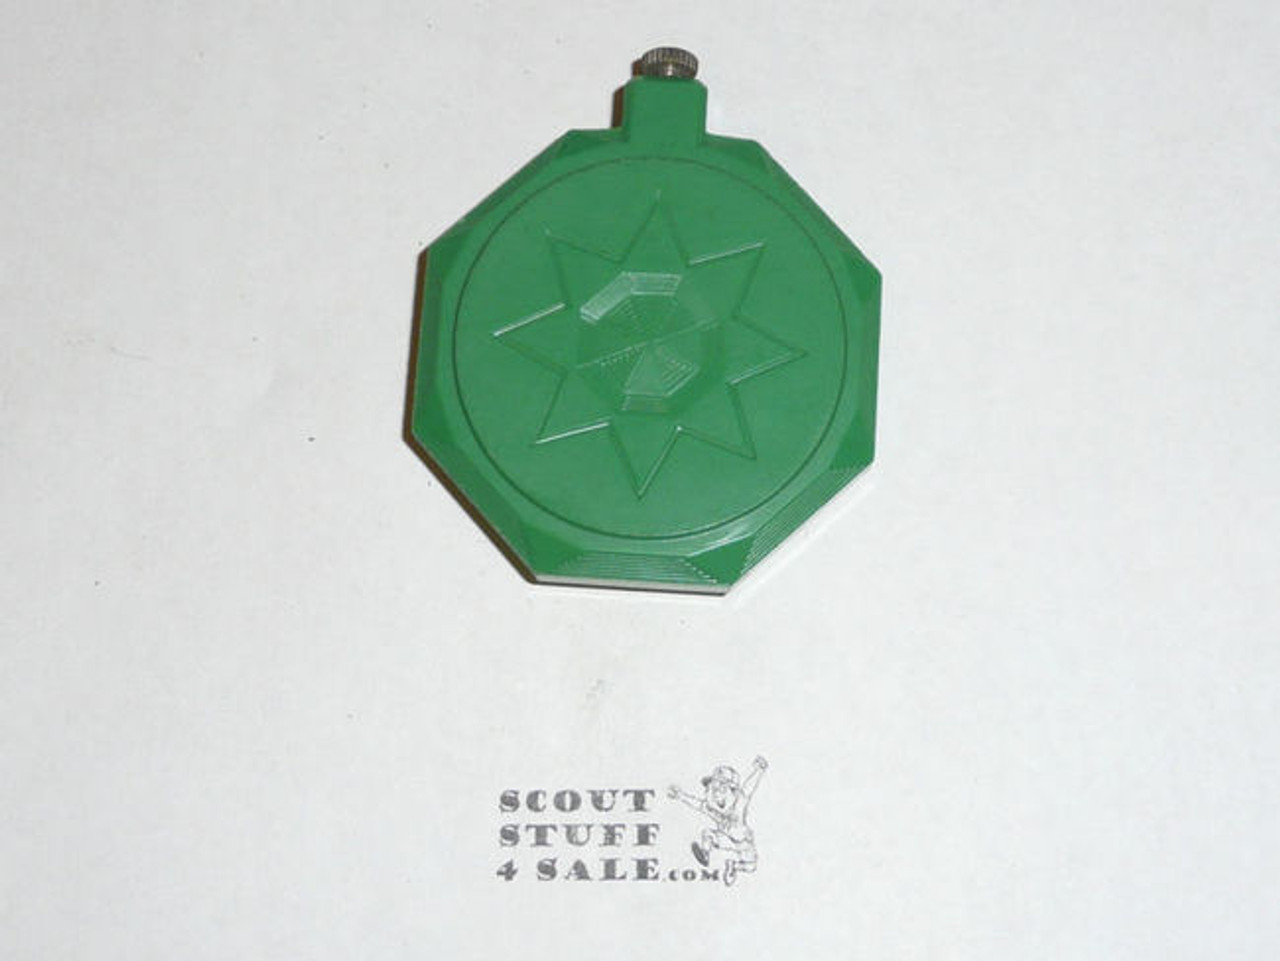 1930's Bakelite Girl Scout Compass made by Taylor - Glass and directional needle missing